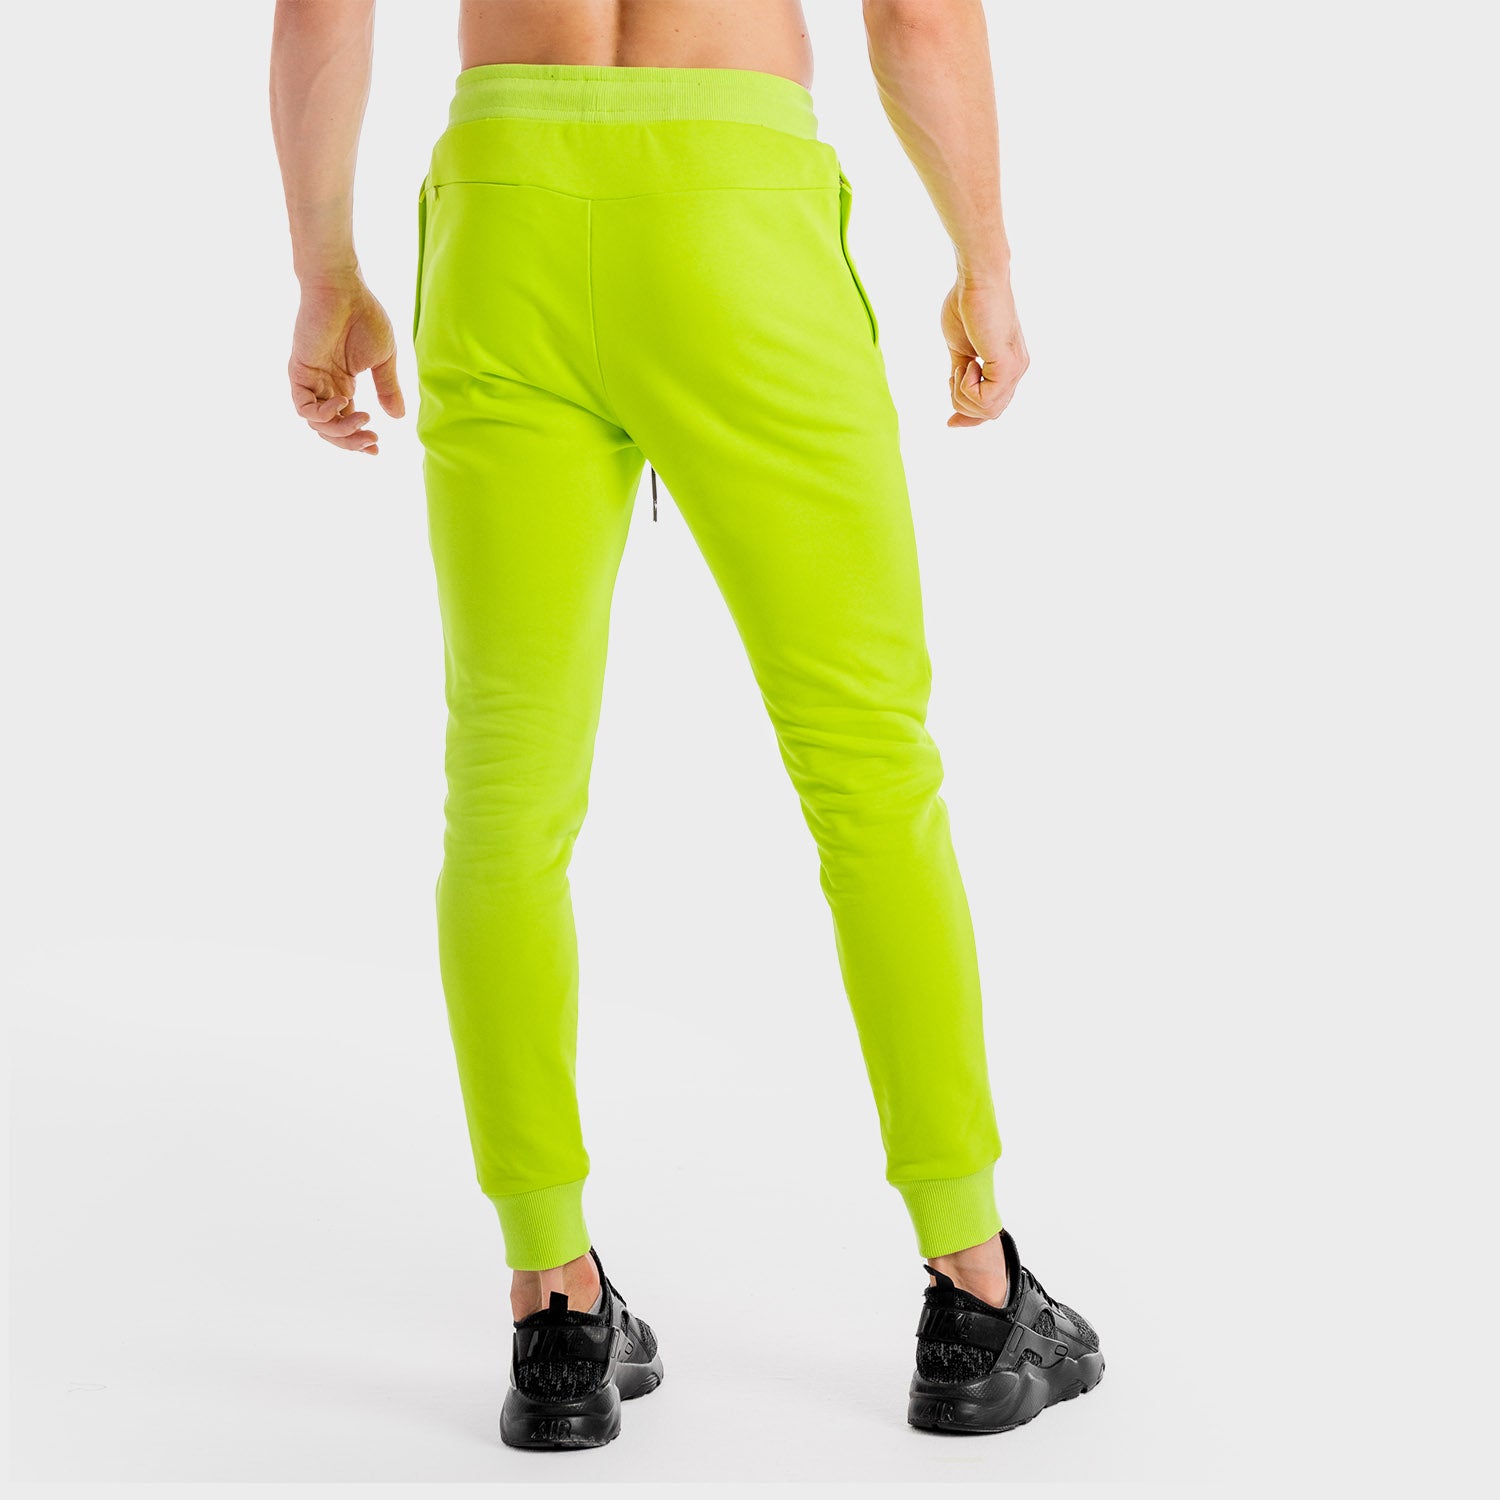 squatwolf-gym-wear-core-cuffed-joggers-neon-workout-pants-for-men